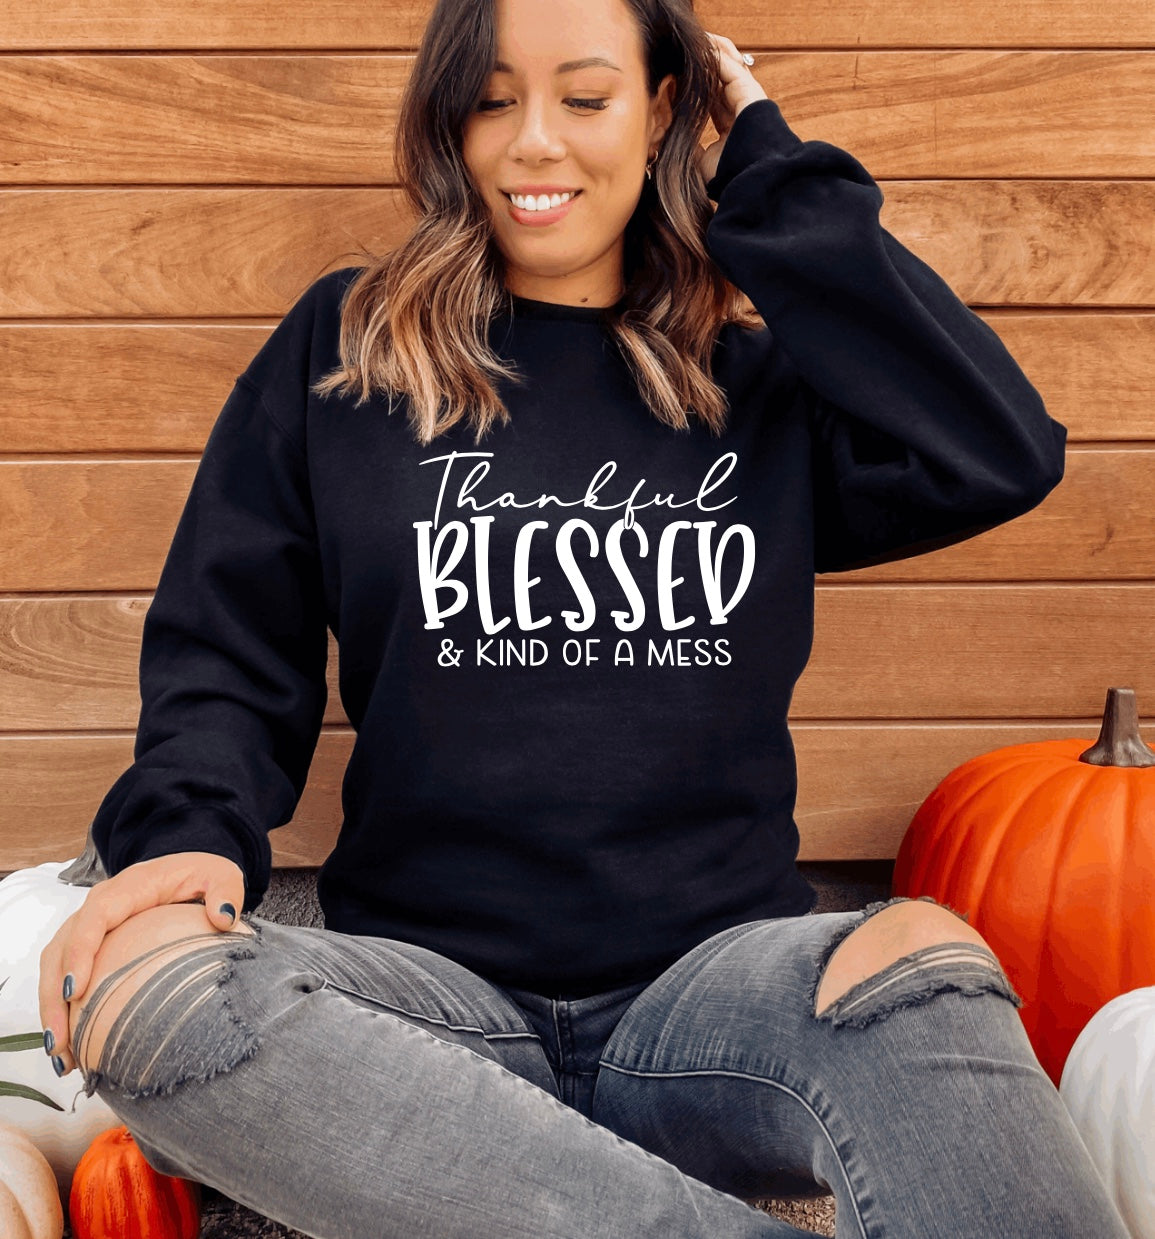 Thankful blessed and kind of a mess crewneck sweatshirt 